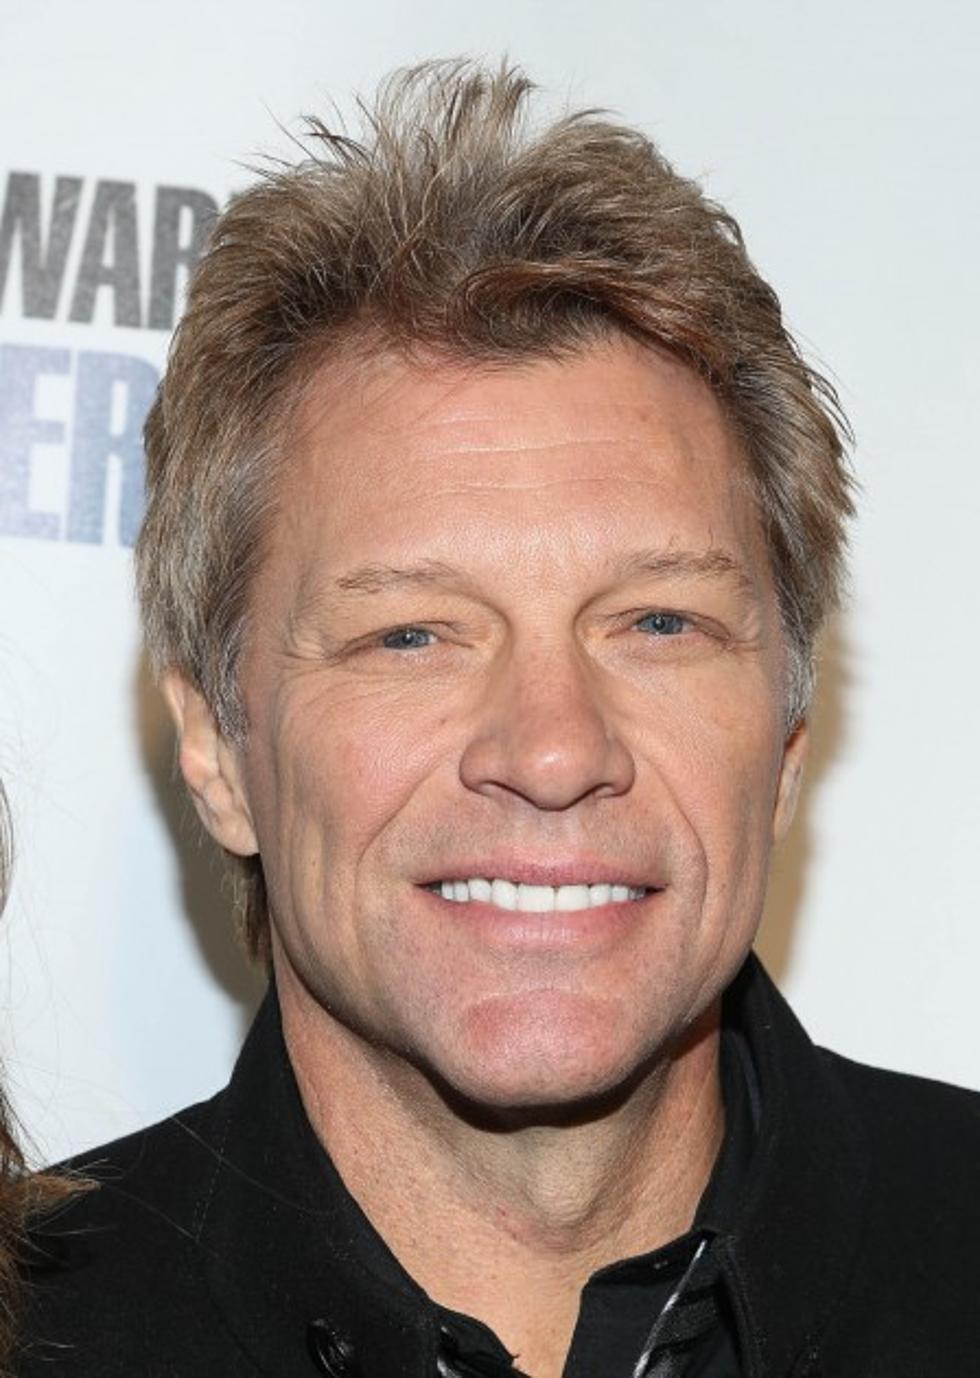 Special Edition of WPDH Big Hair Scare Monday Featuring Bon Jovi